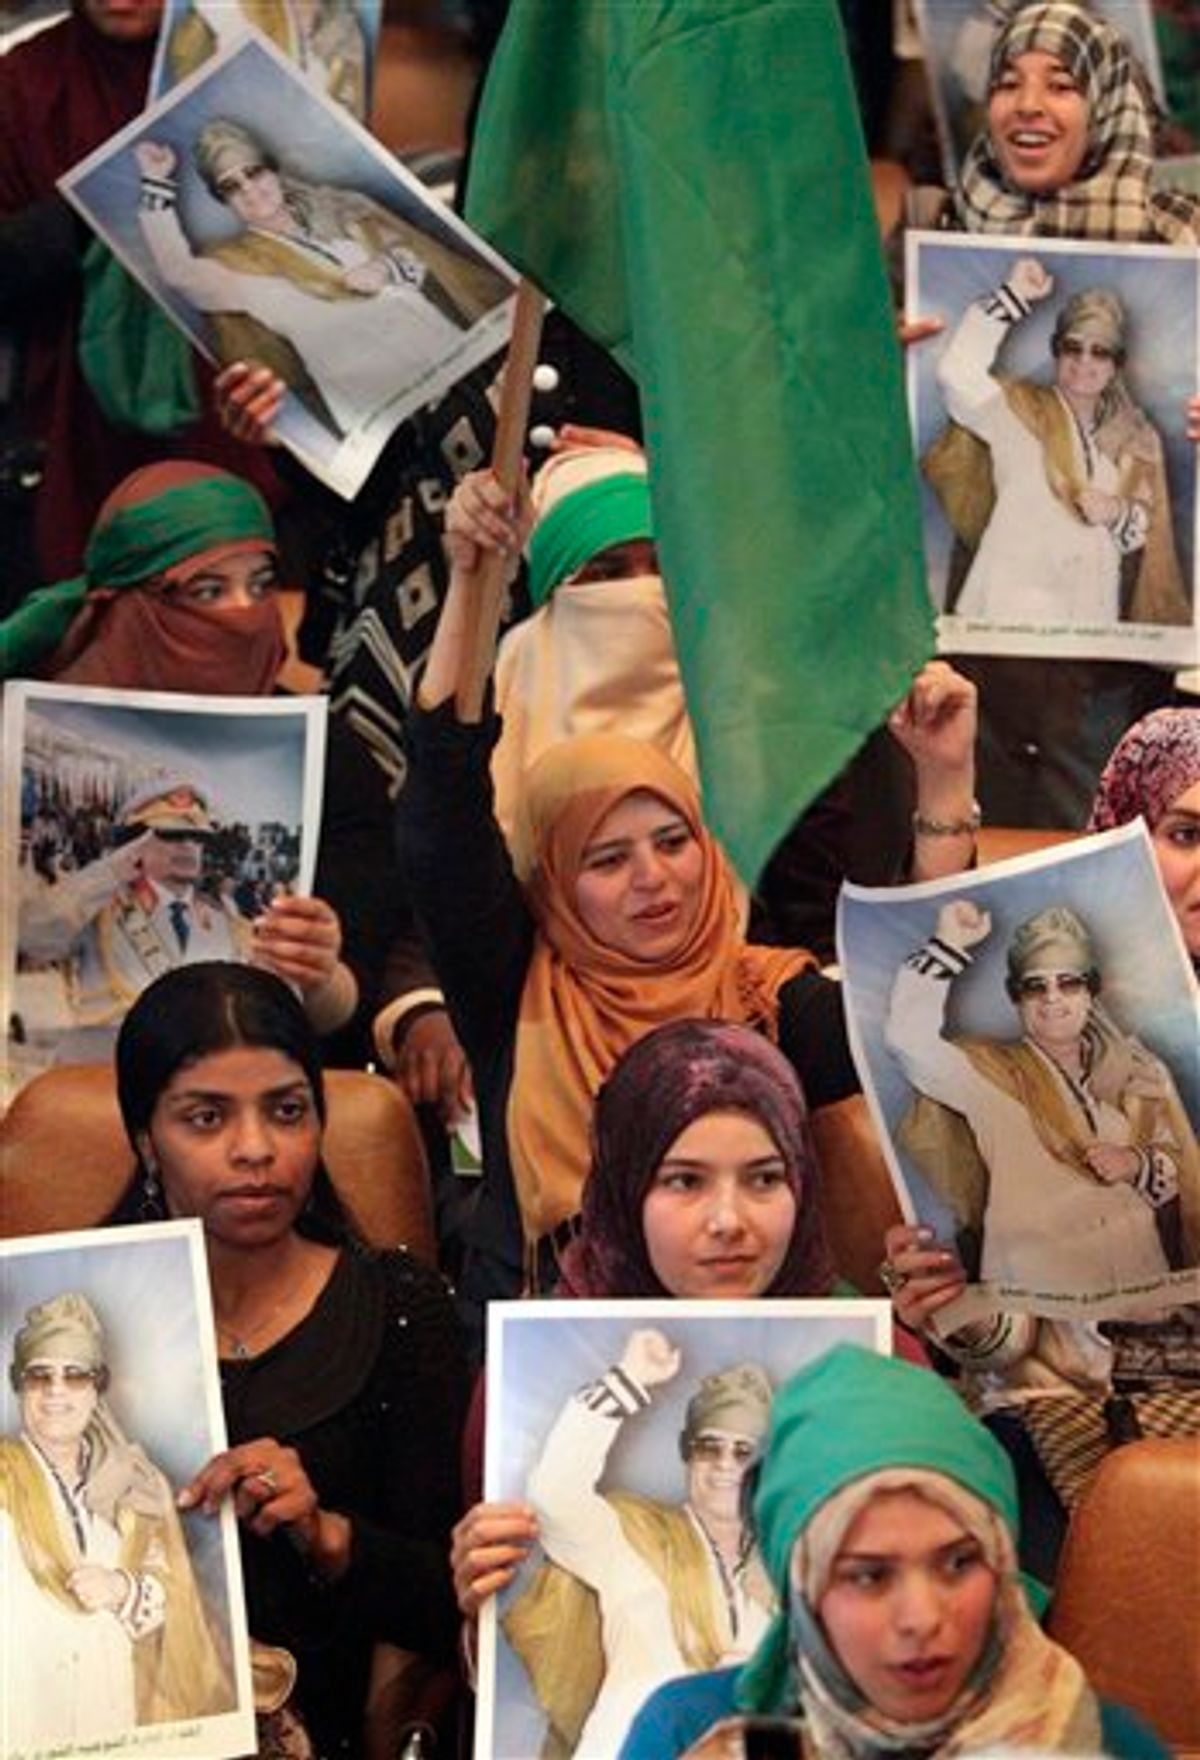 In this image taken during a trip organized by Libyan authorities, students hold portraits of Libyan leader Moammar Gadhafi during a meeting at  the Al Fateh University in Tripoli, Libya, celebrating Student Day,  Thursday, April 7, 2011. (AP Photo/Pier Paolo Cito) (AP)